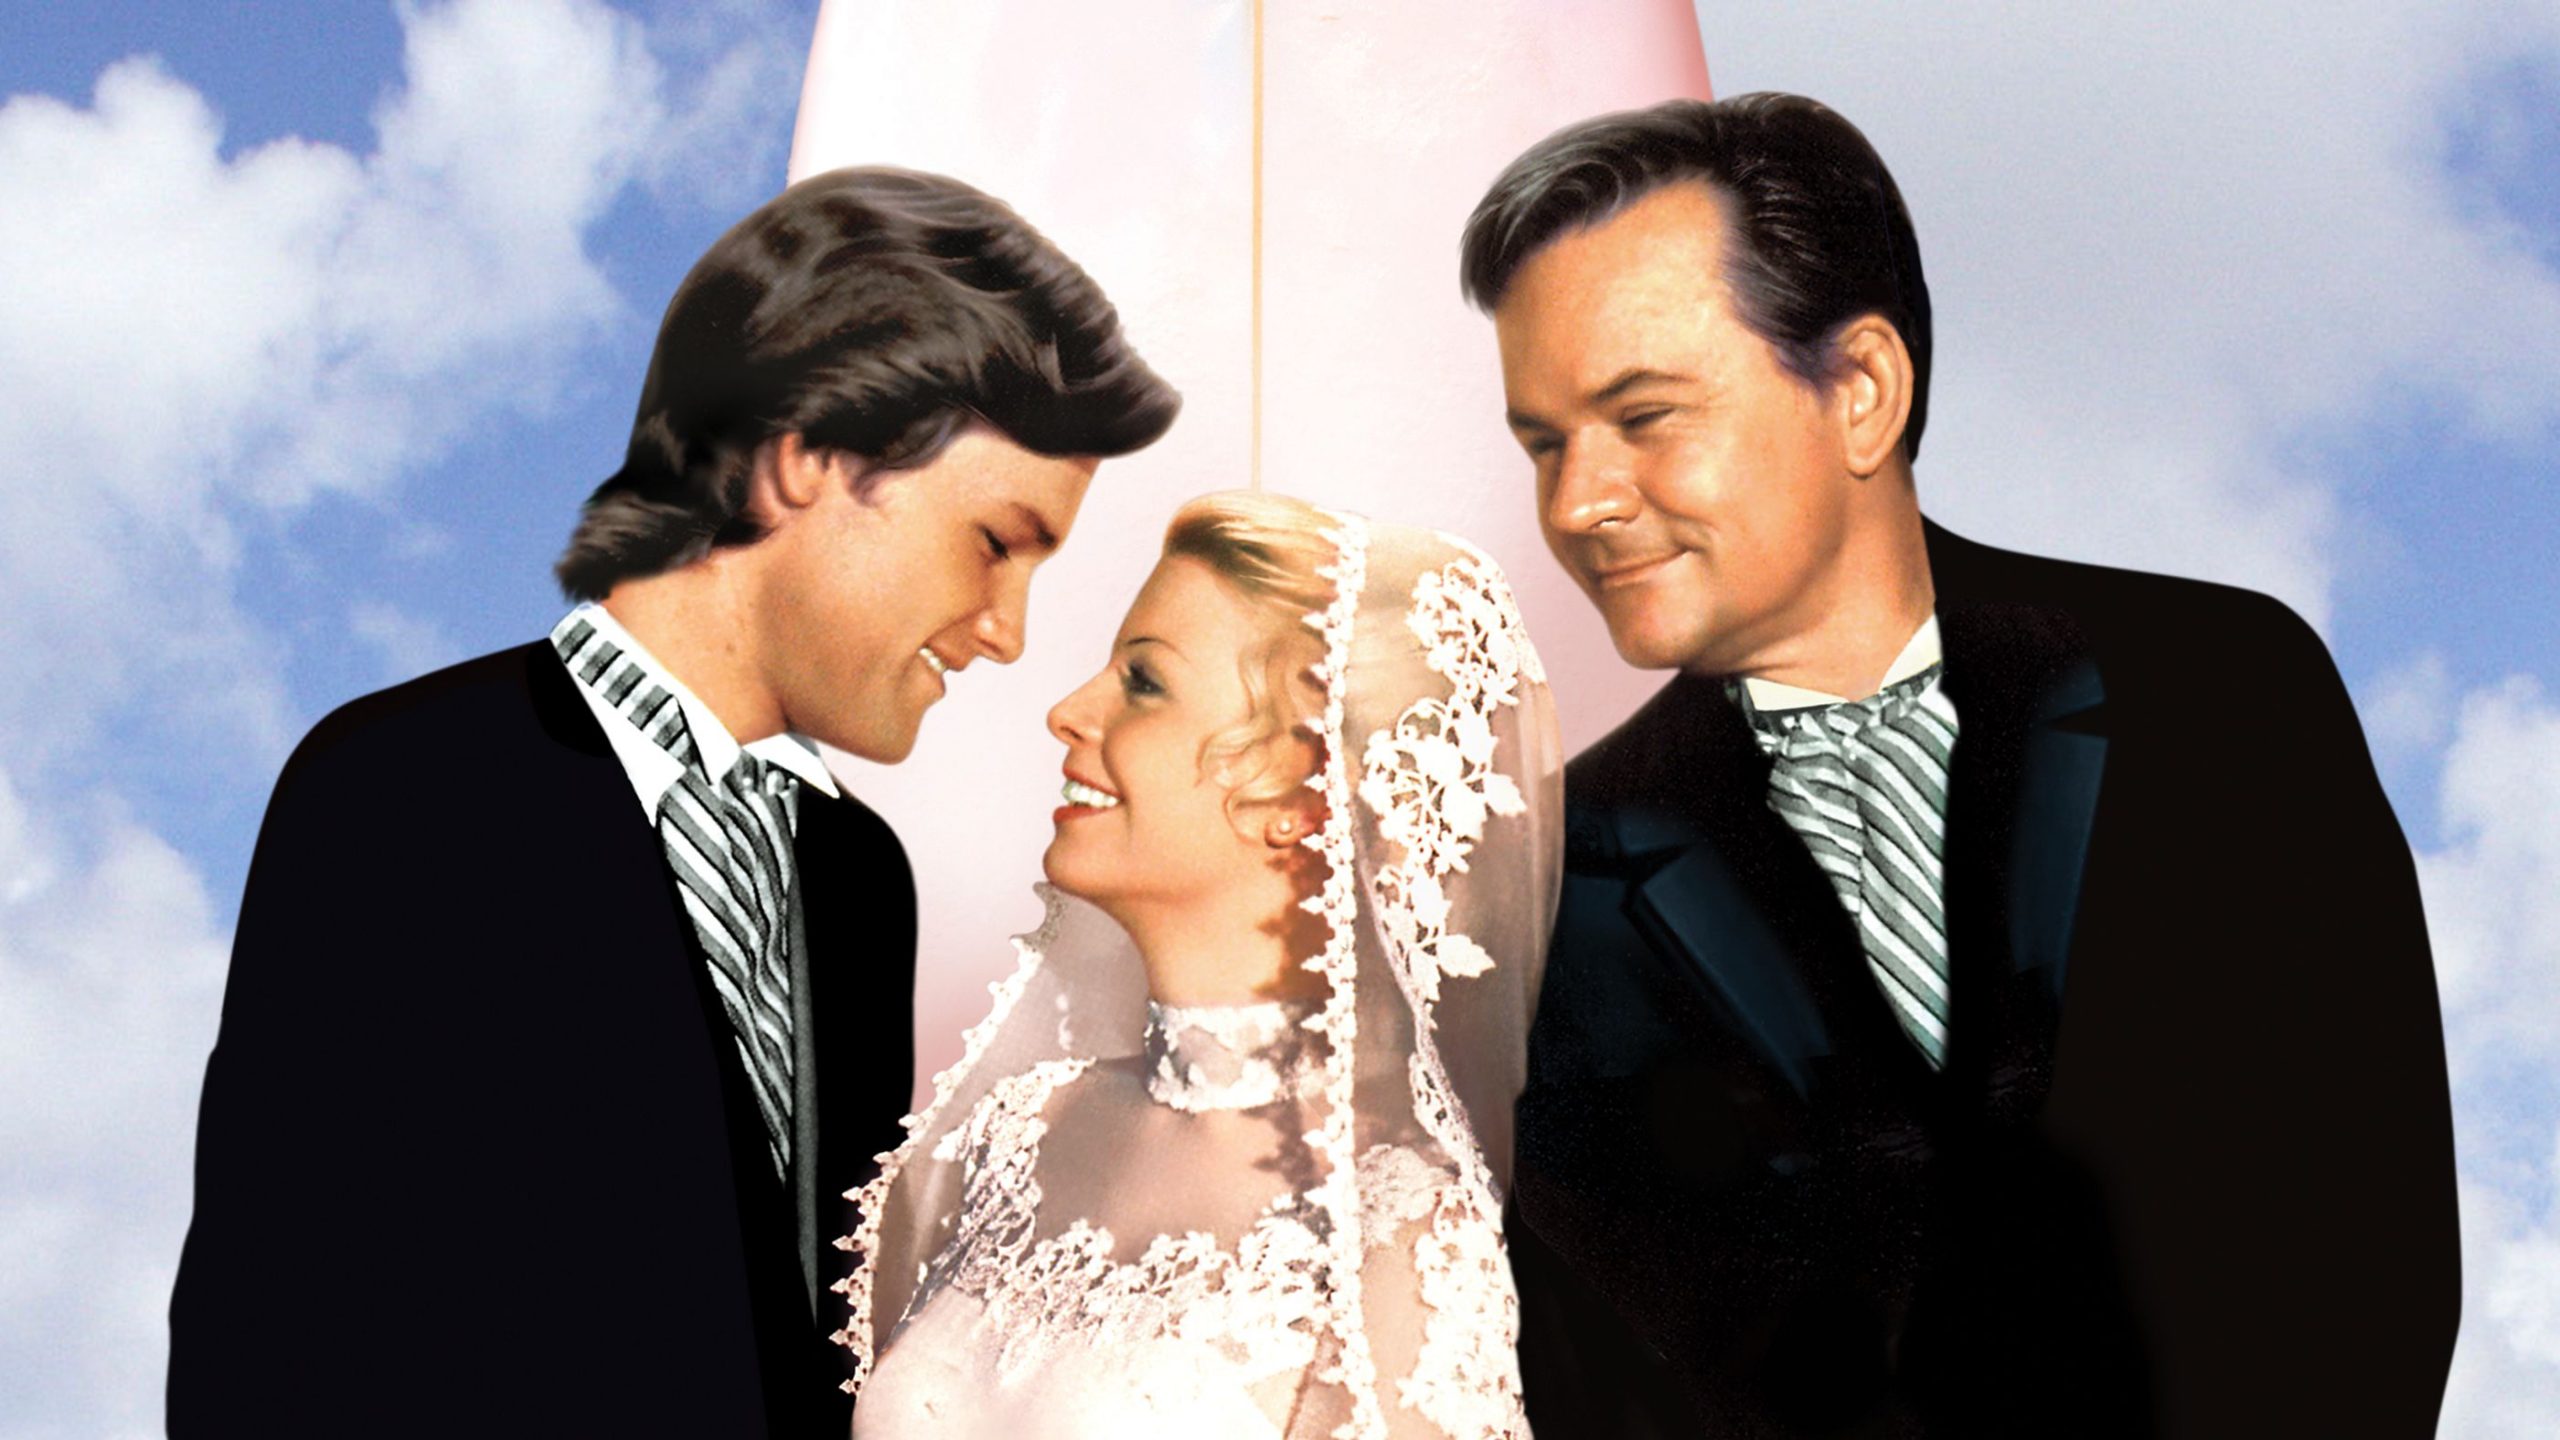 Super dad Filming Locations. All the locations of the 1973 Walt Disney Live Action Movie. IN frame (l-r) Kurt Russell, Kathleen Cody and Bob Crane.
Credit: Walt Disney.